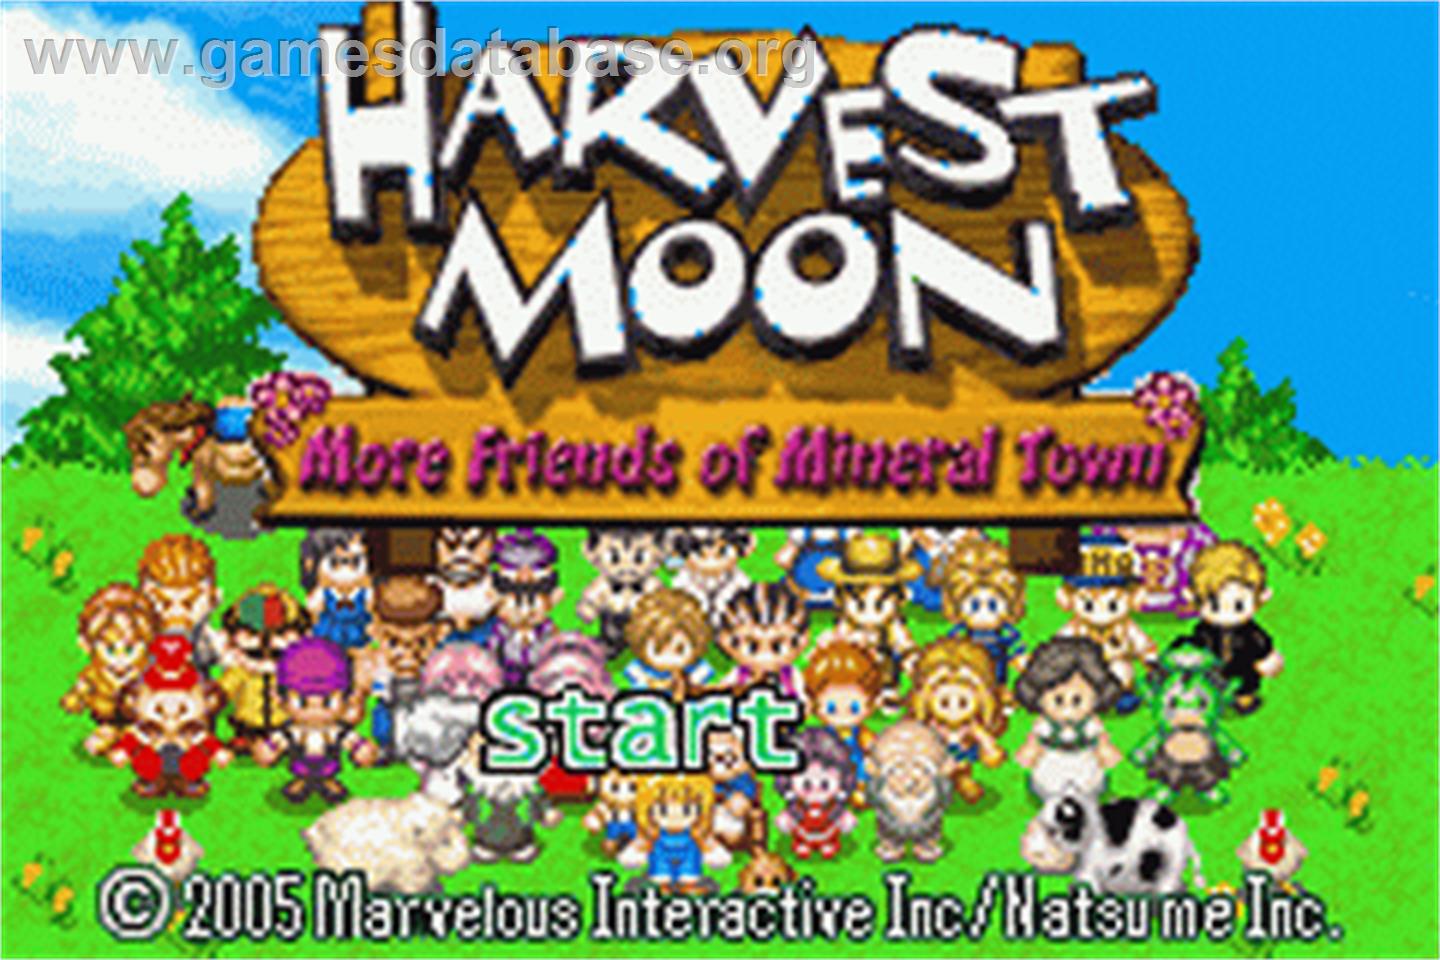 Harvest Moon: More Friends of Mineral Town - Nintendo Game Boy Advance - Artwork - Title Screen